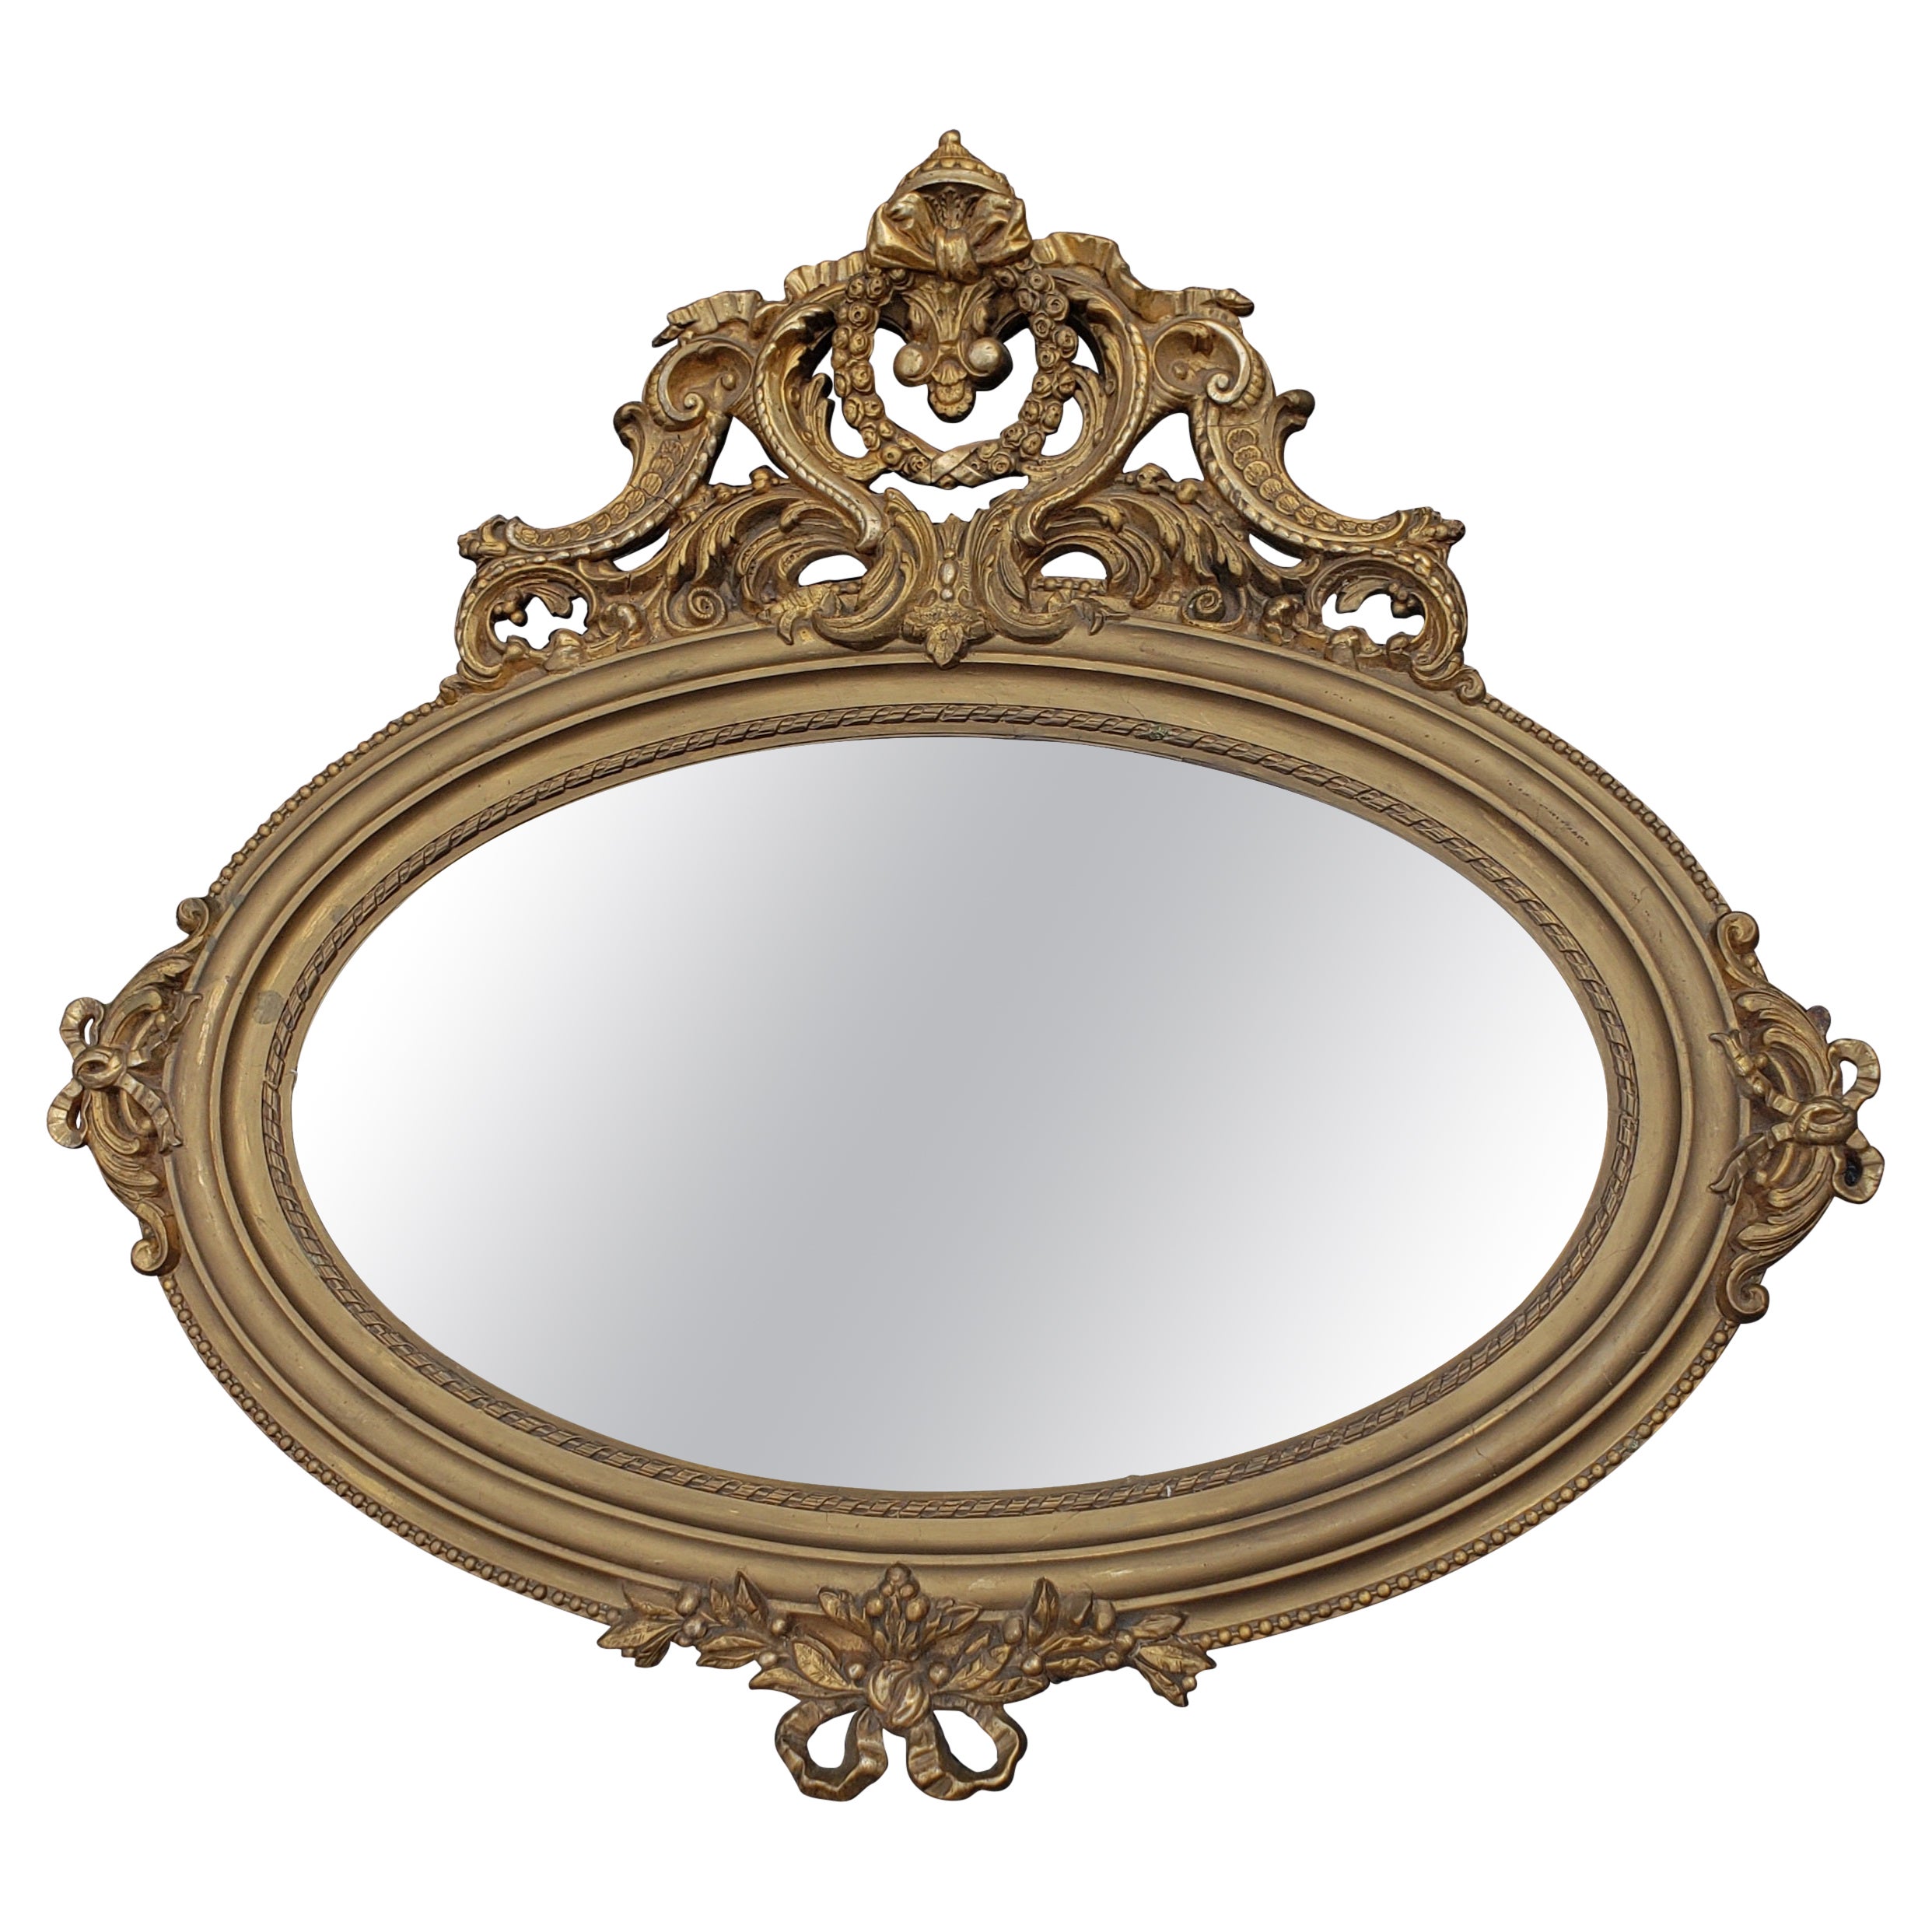 Louis XVI Style Giltwood Decorated Oval Wall Mirror